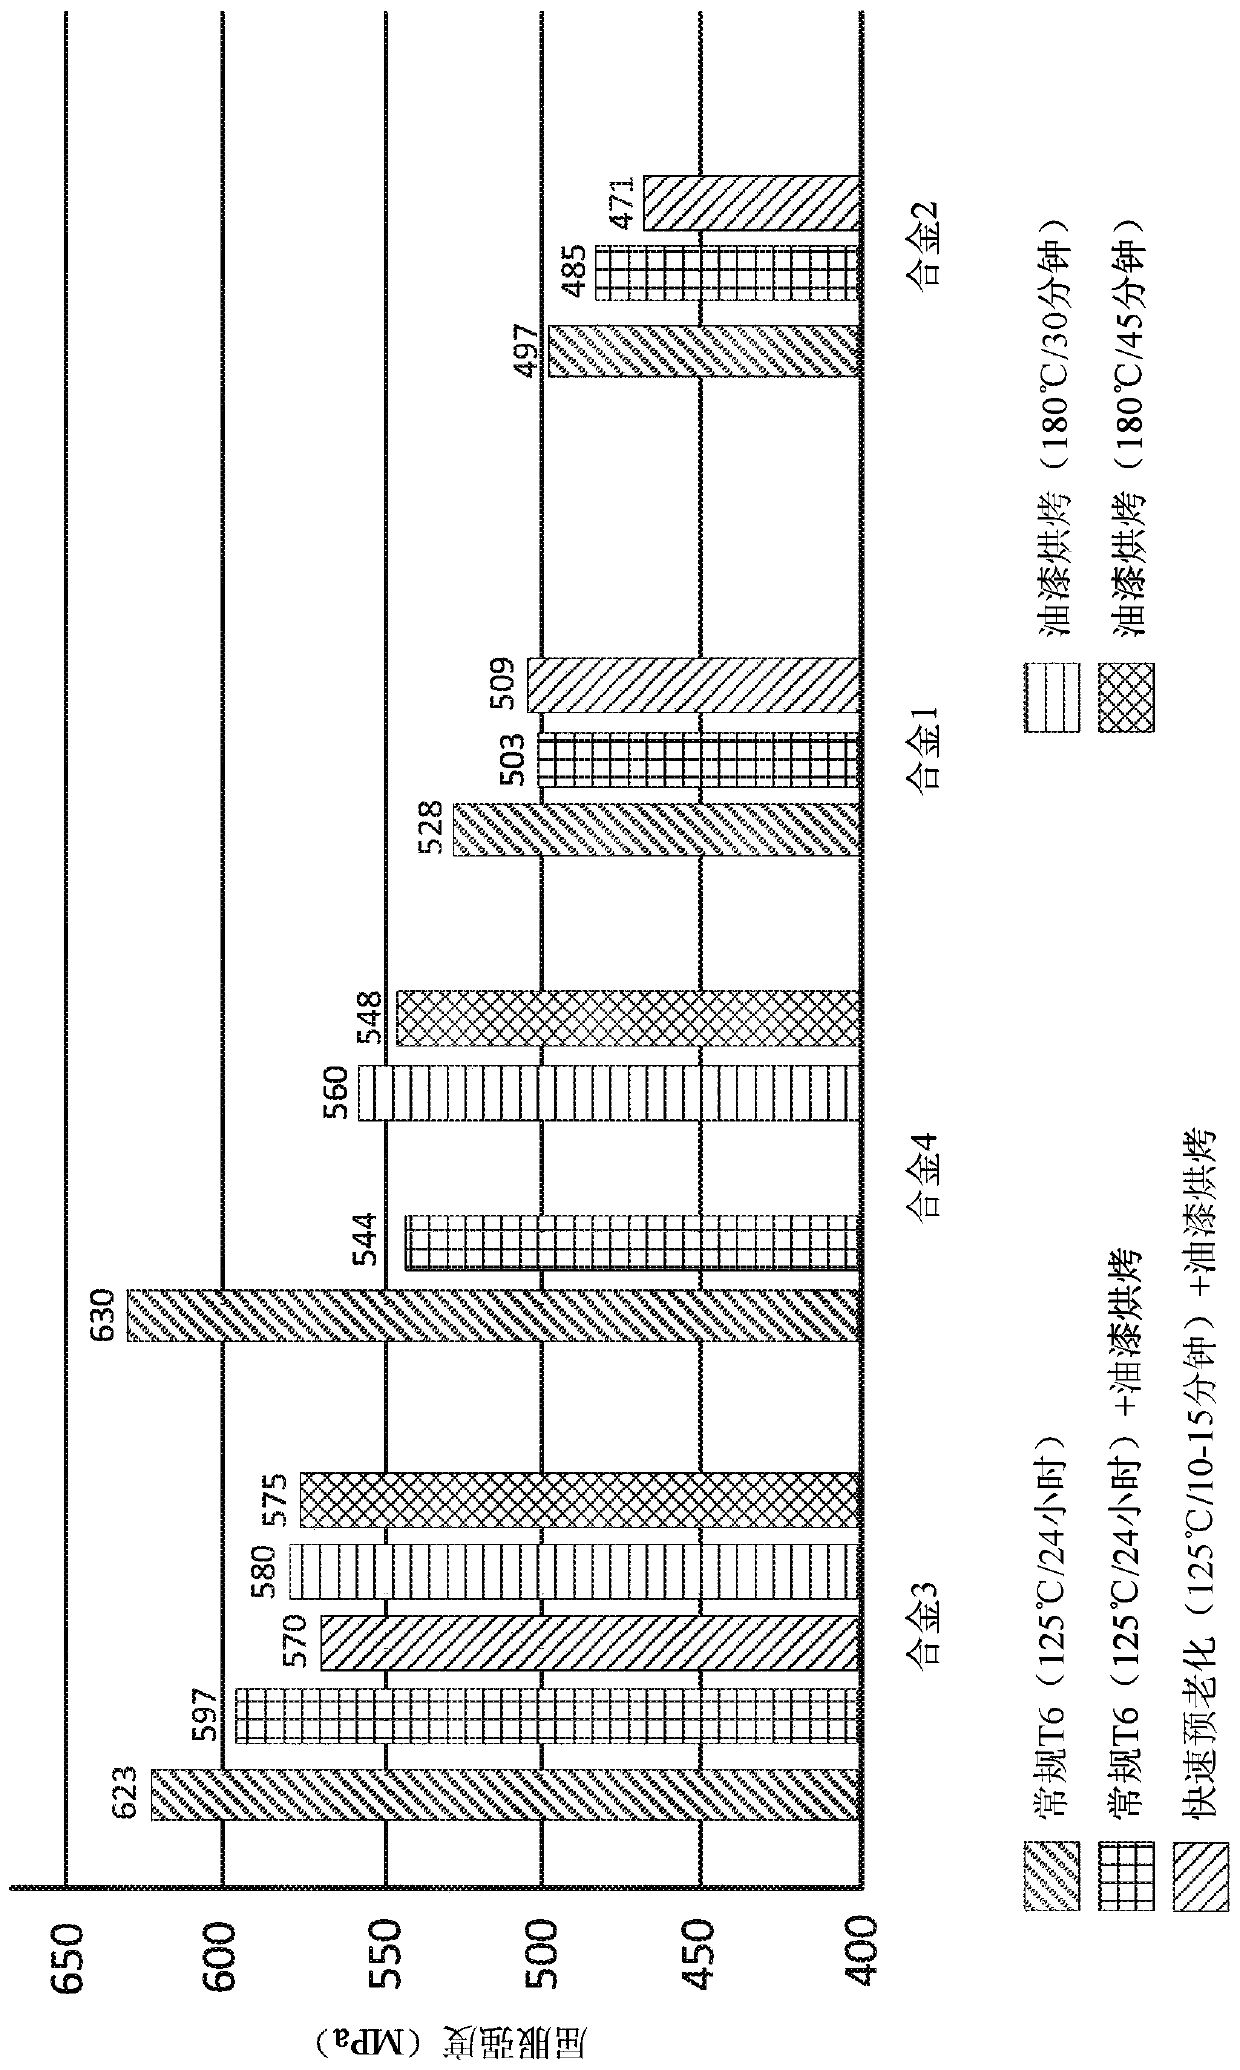 Rapid aging of high strength 7xxx aluminum alloys and methods of making the same